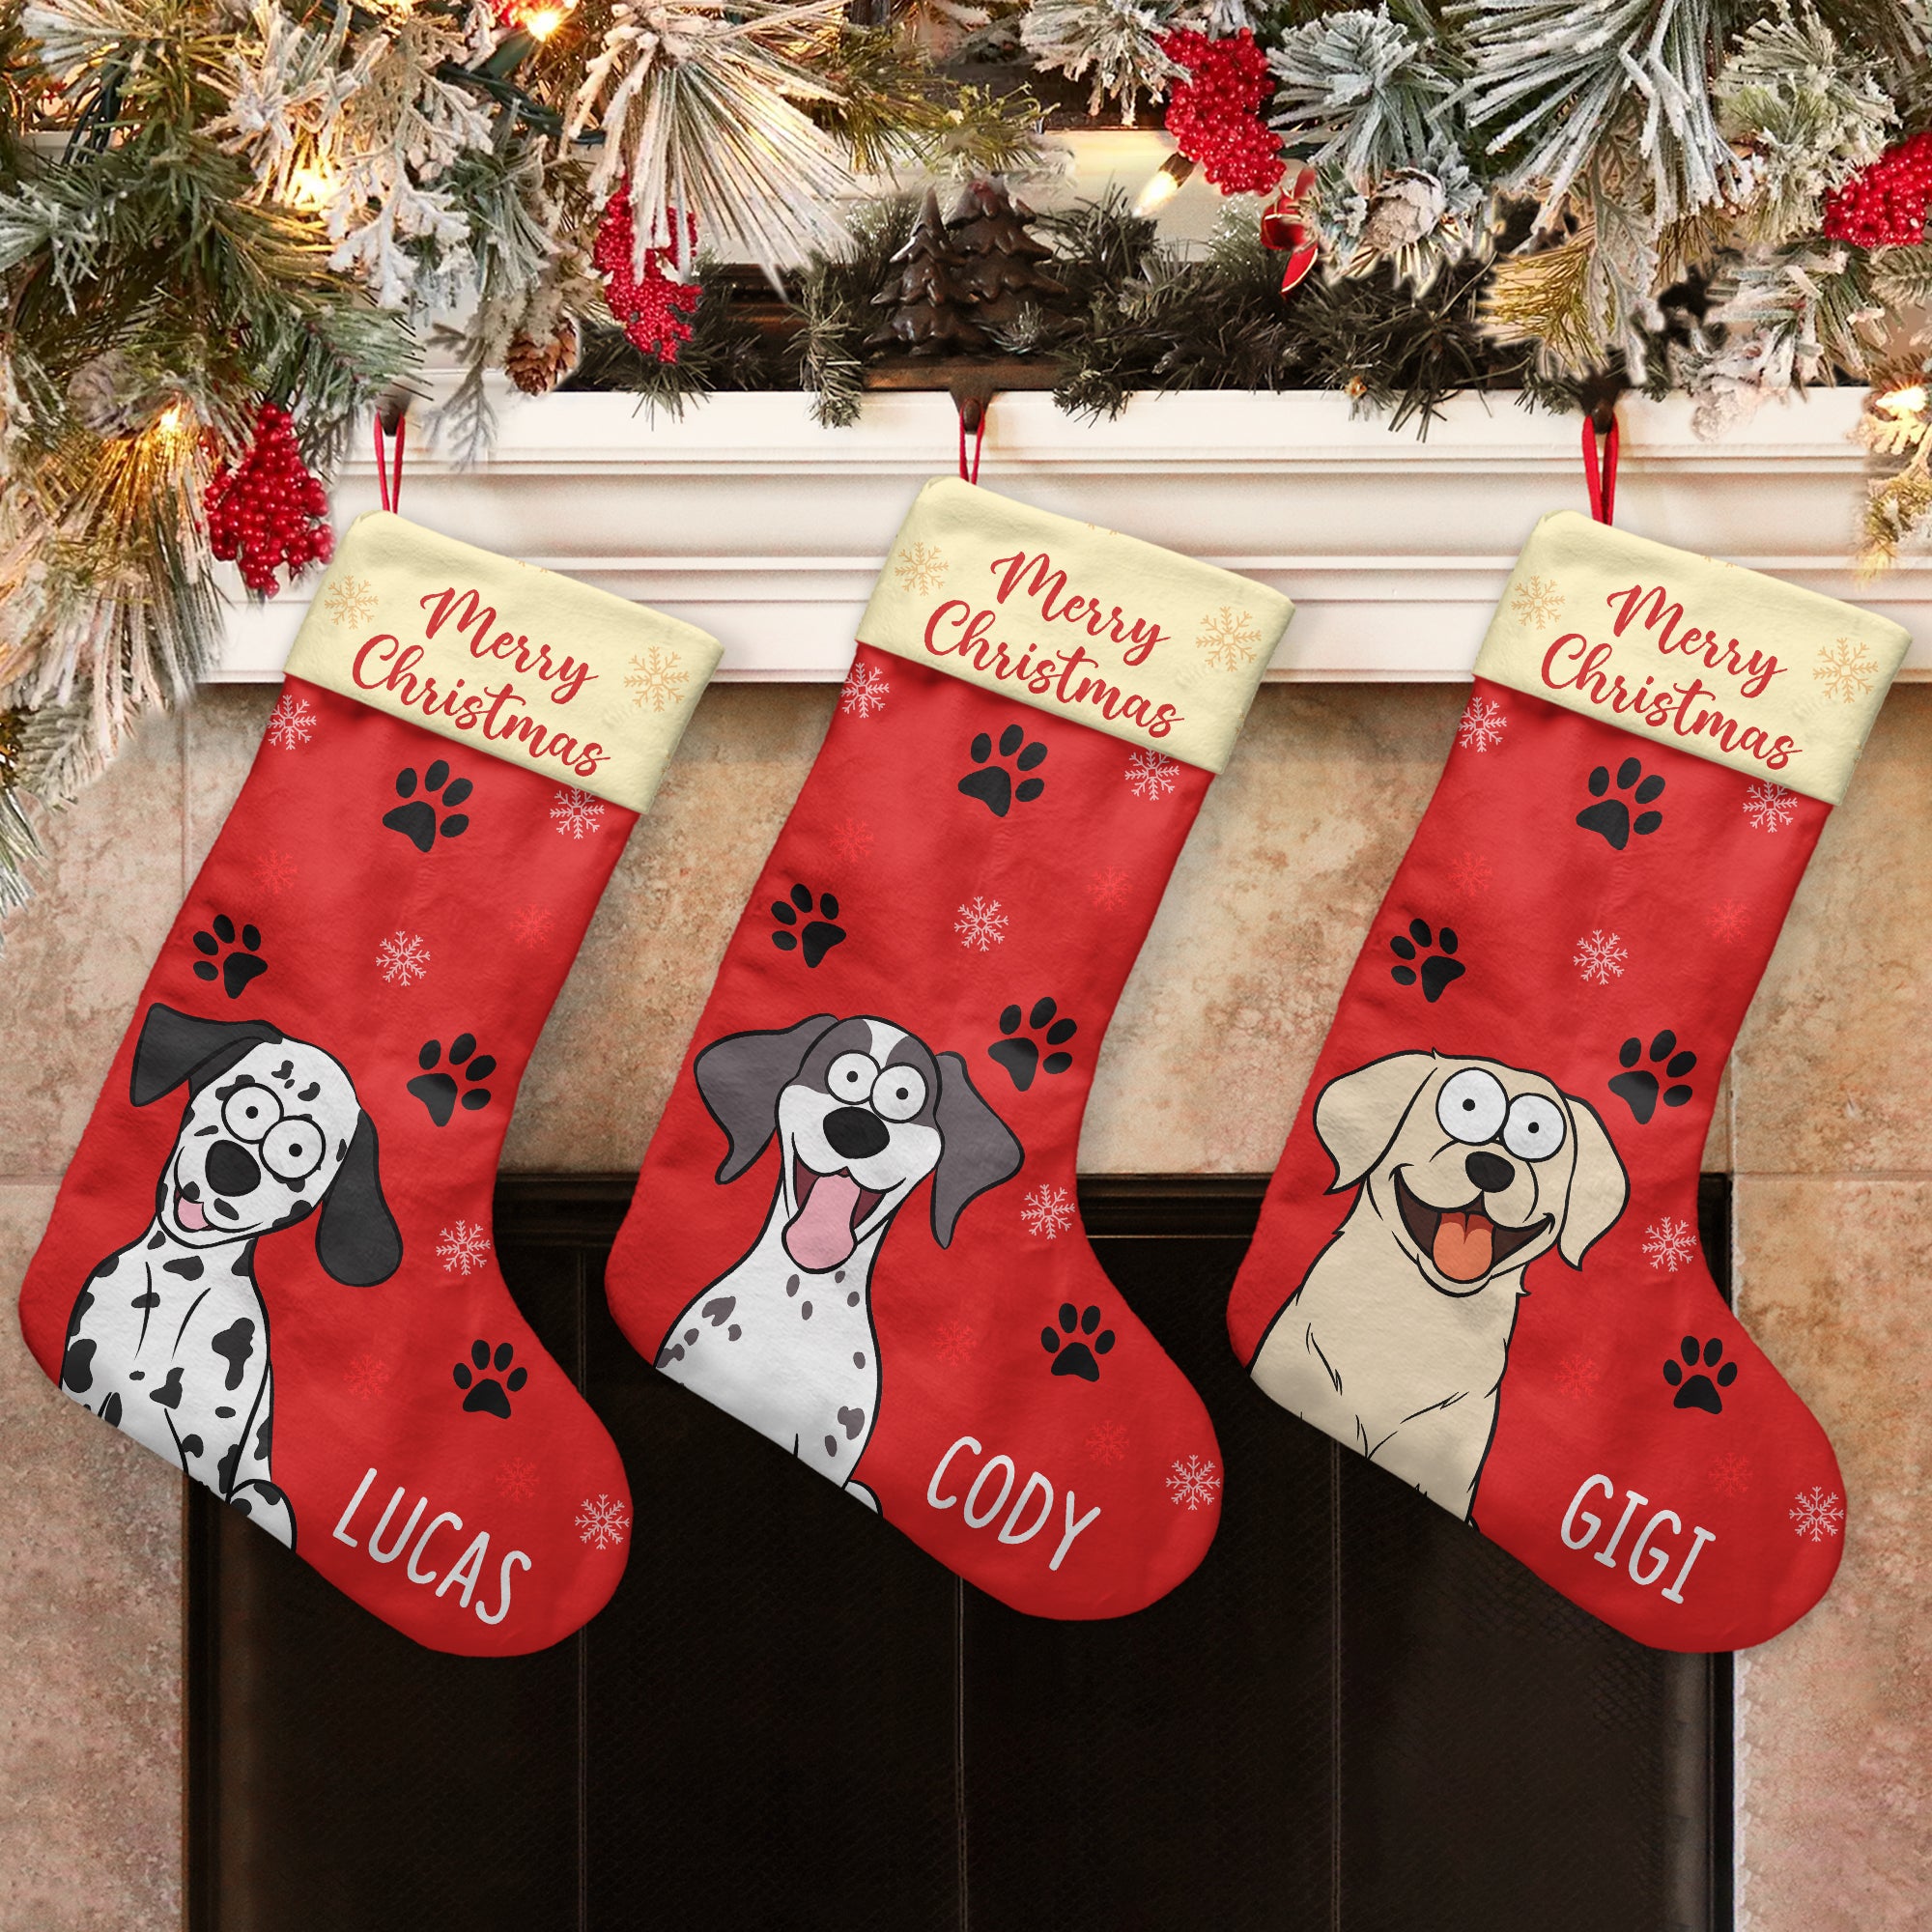 Merry Christmas - Personalized Stocking